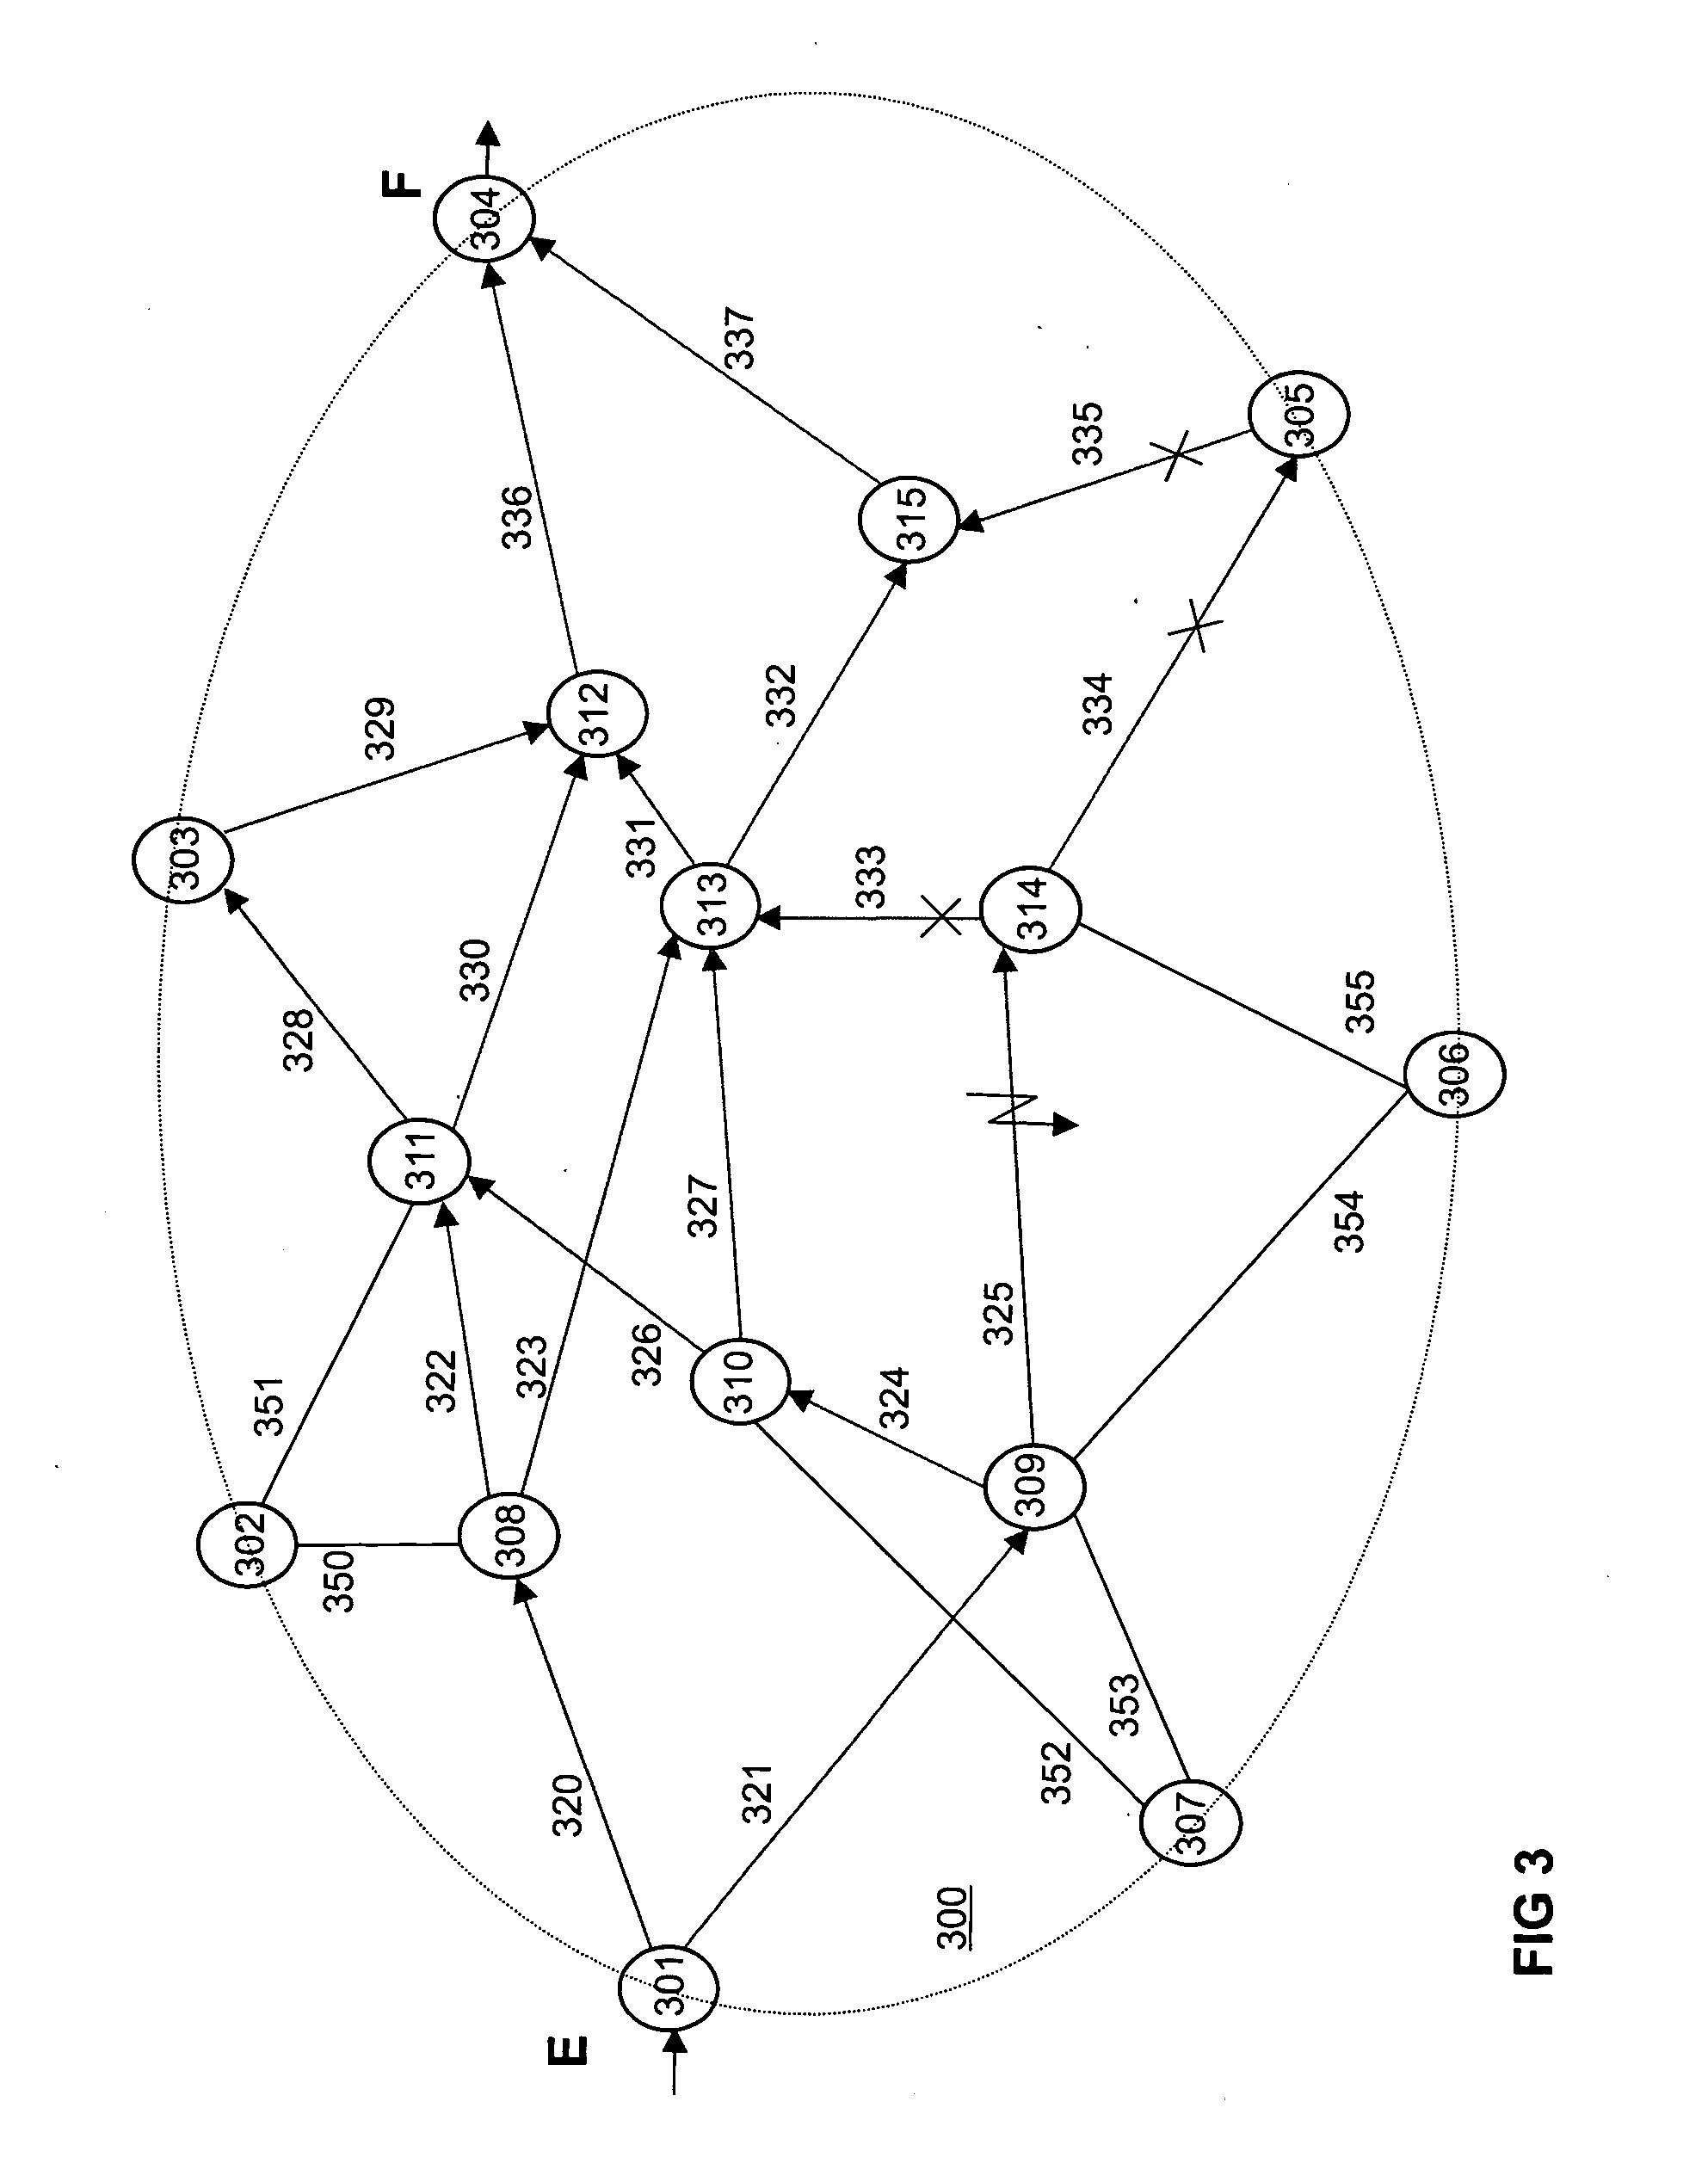 Data transmission in a packet-oriented communication network